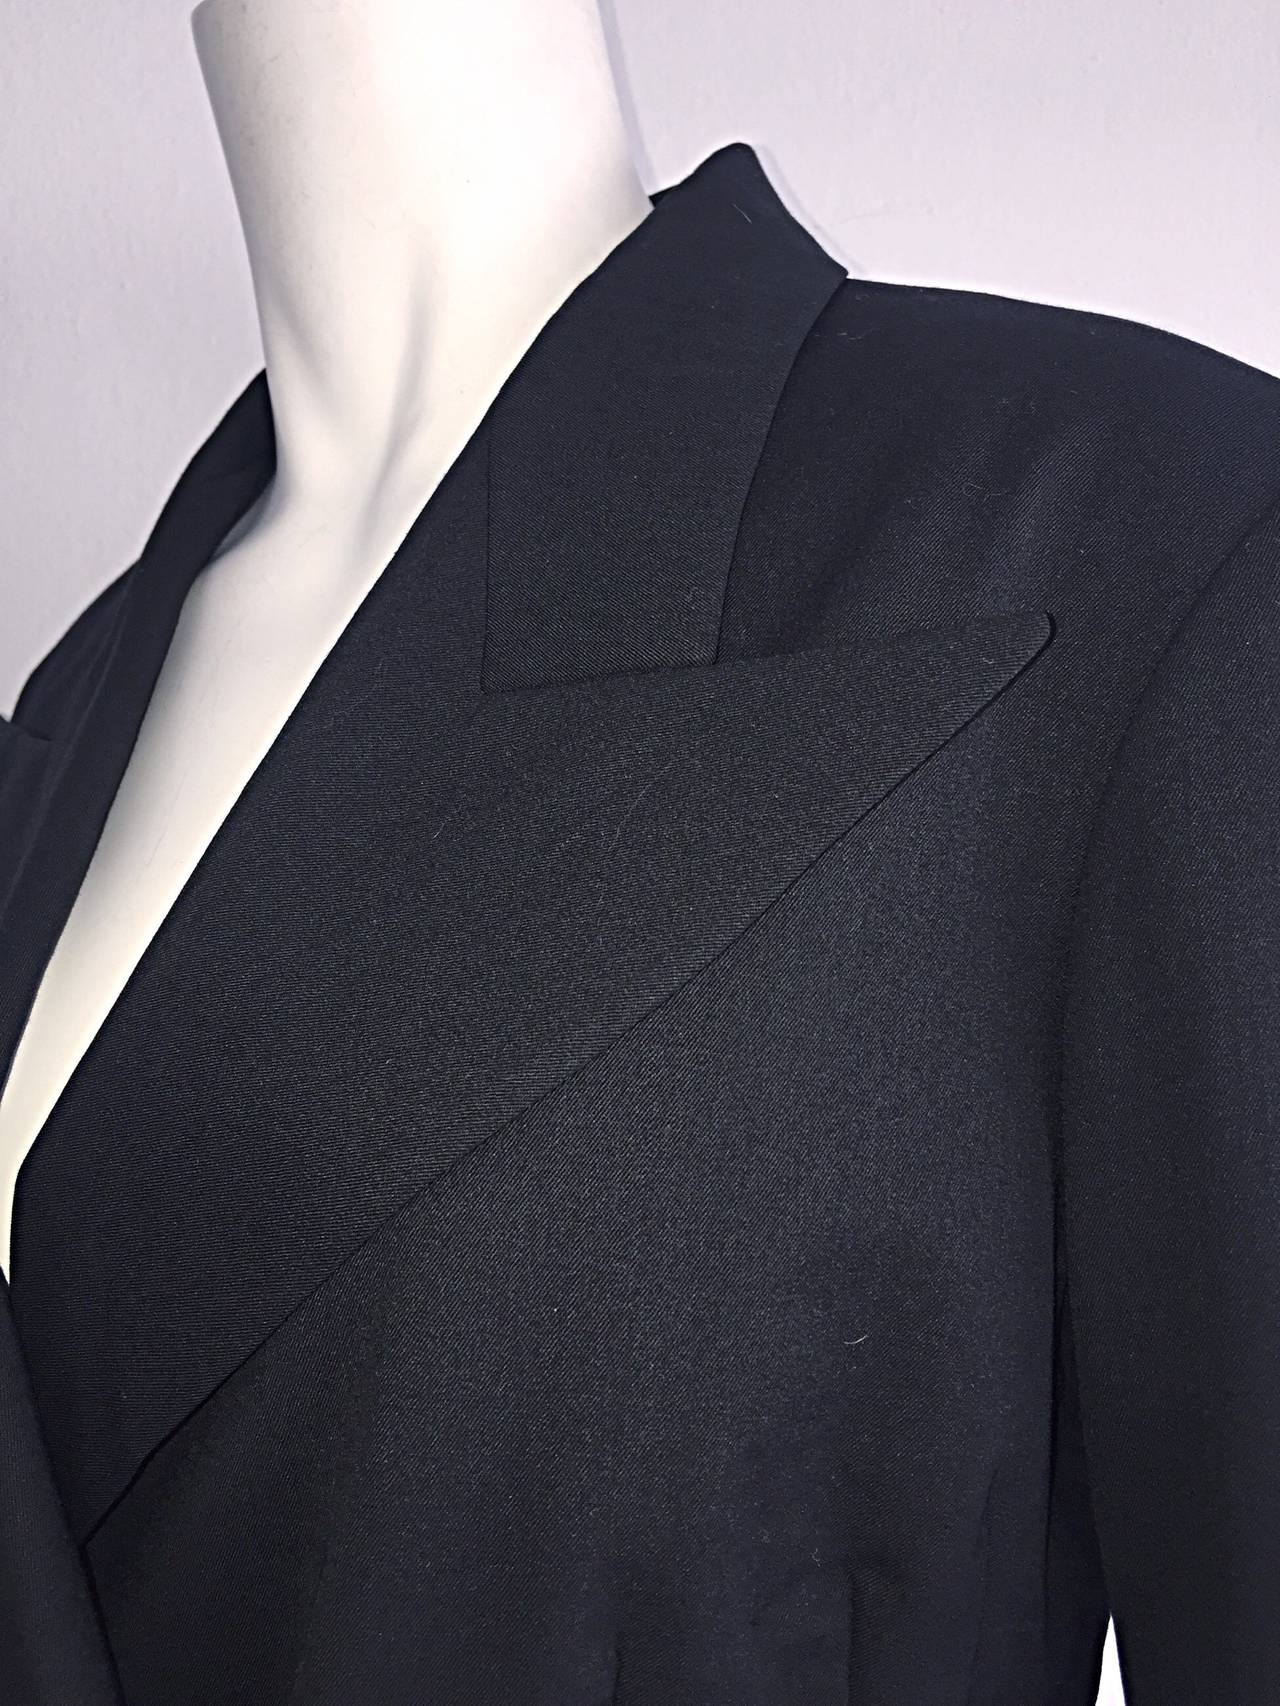 Amazing vintage Yohji Yamamoto black double breasted blazer! Signature Yohji 'slouchy' fit. Features Avant Garde oversized pointed collars, with two buttons down the exterior left side. Hidden interior buttons. Impeccable construction, with